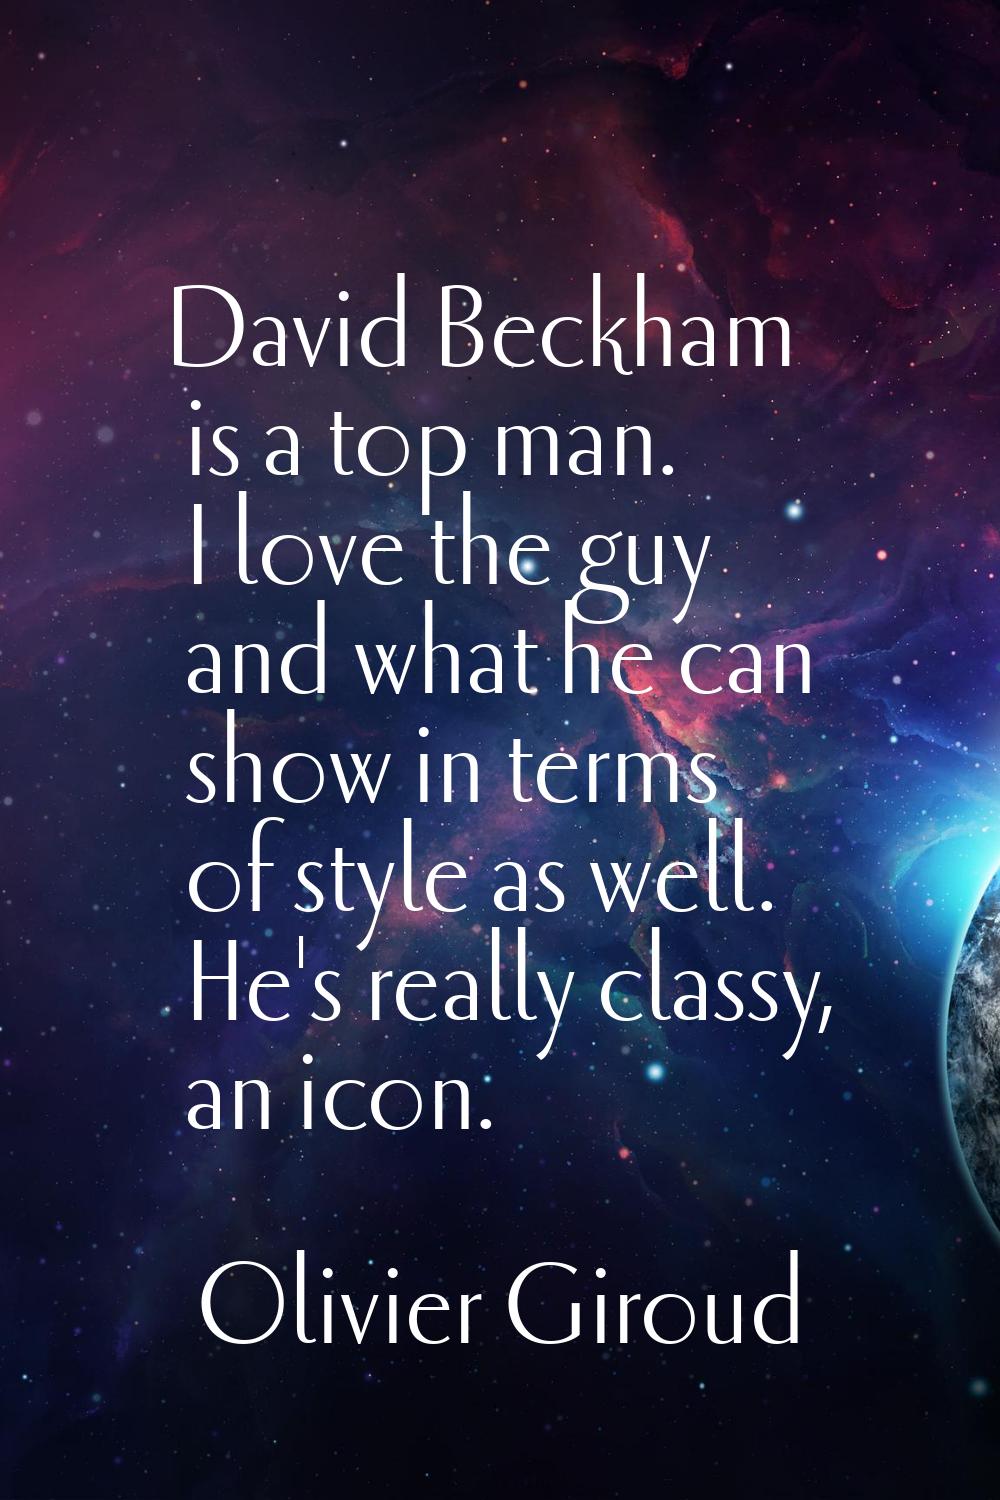 David Beckham is a top man. I love the guy and what he can show in terms of style as well. He's rea